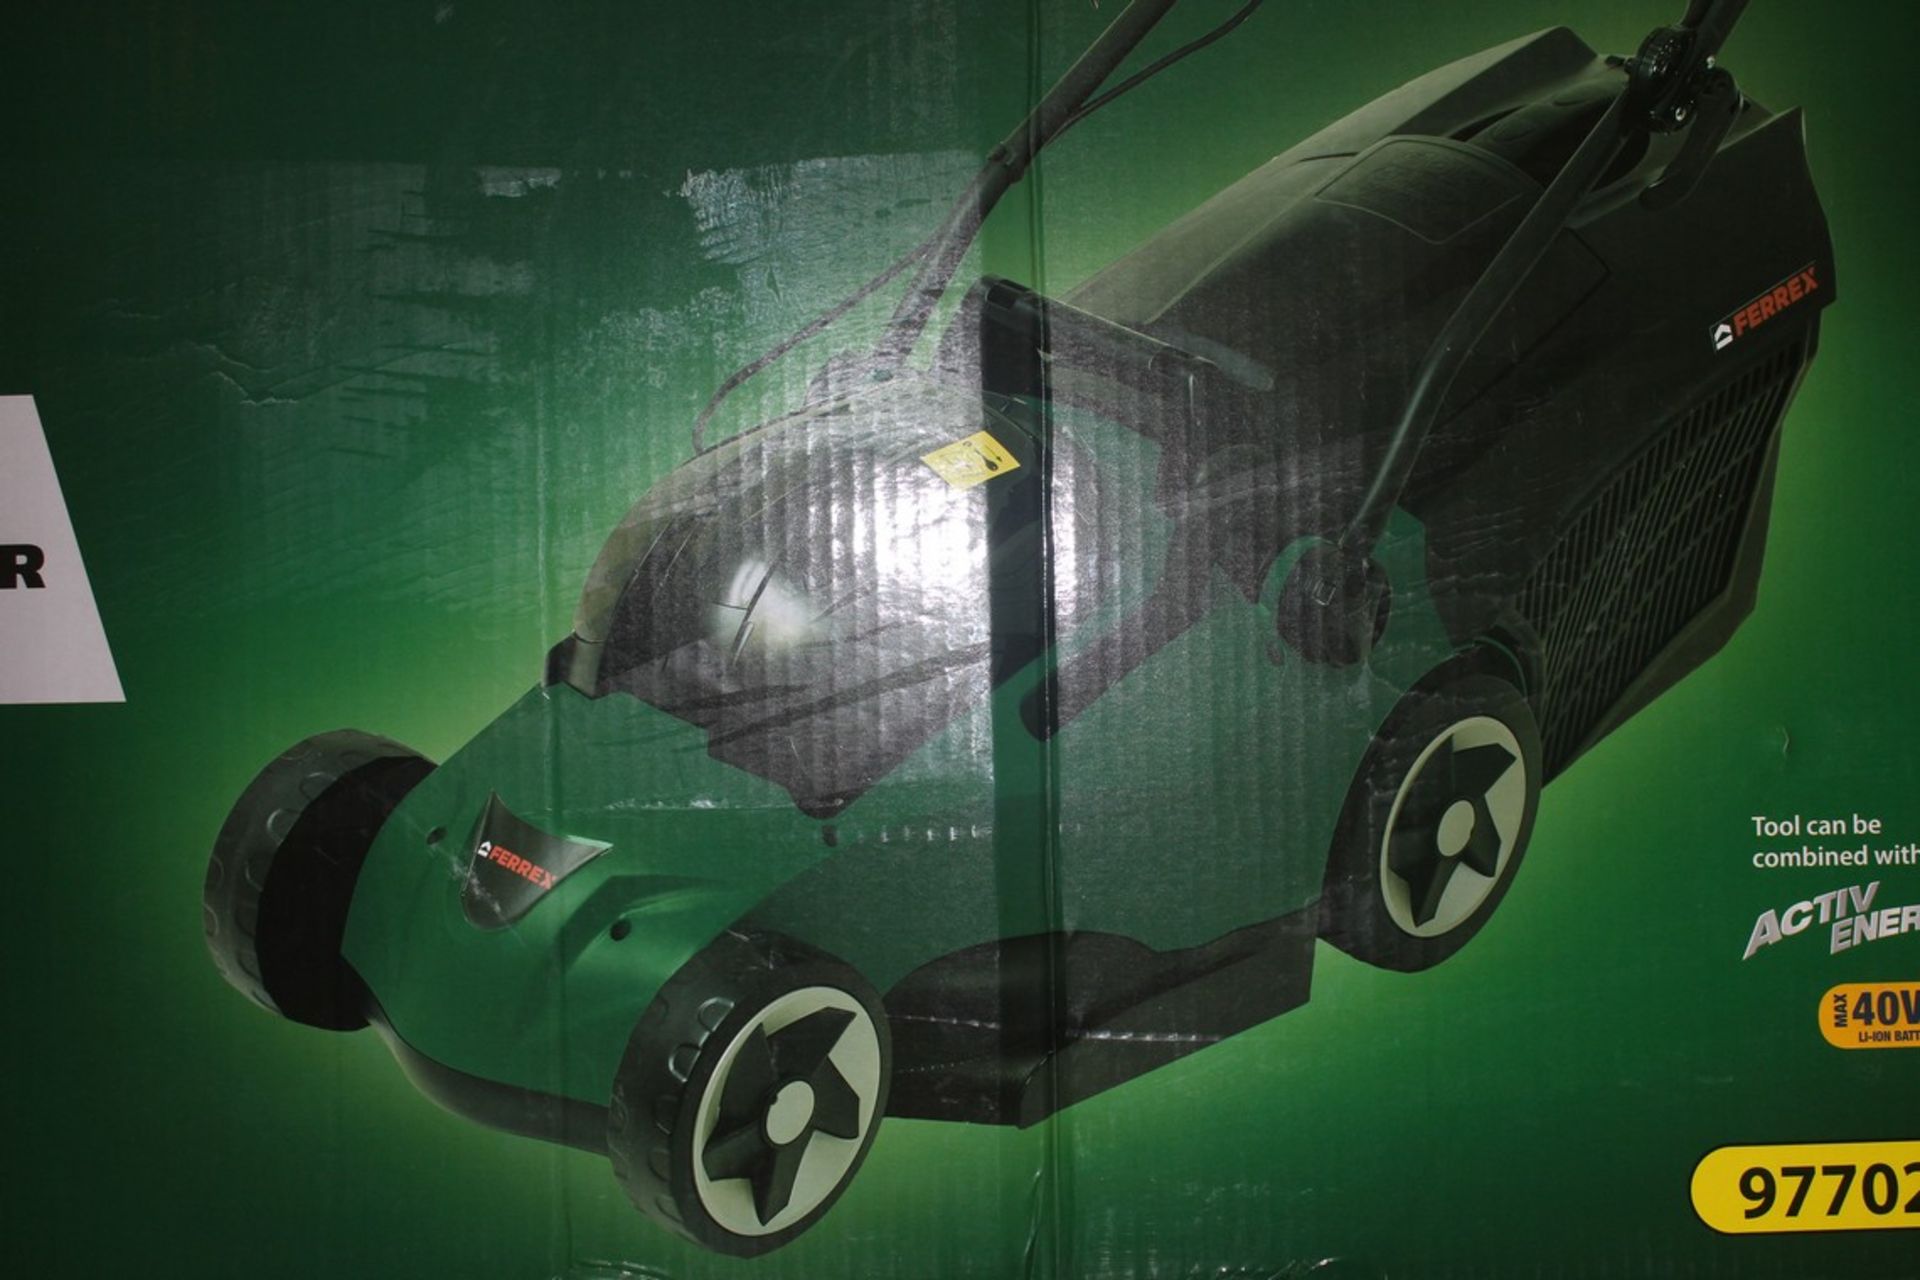 Boxed Ferrex 40V Li-ion Cordless Lawn Mower RRP £75 (Public Viewing and Appraisals Available)